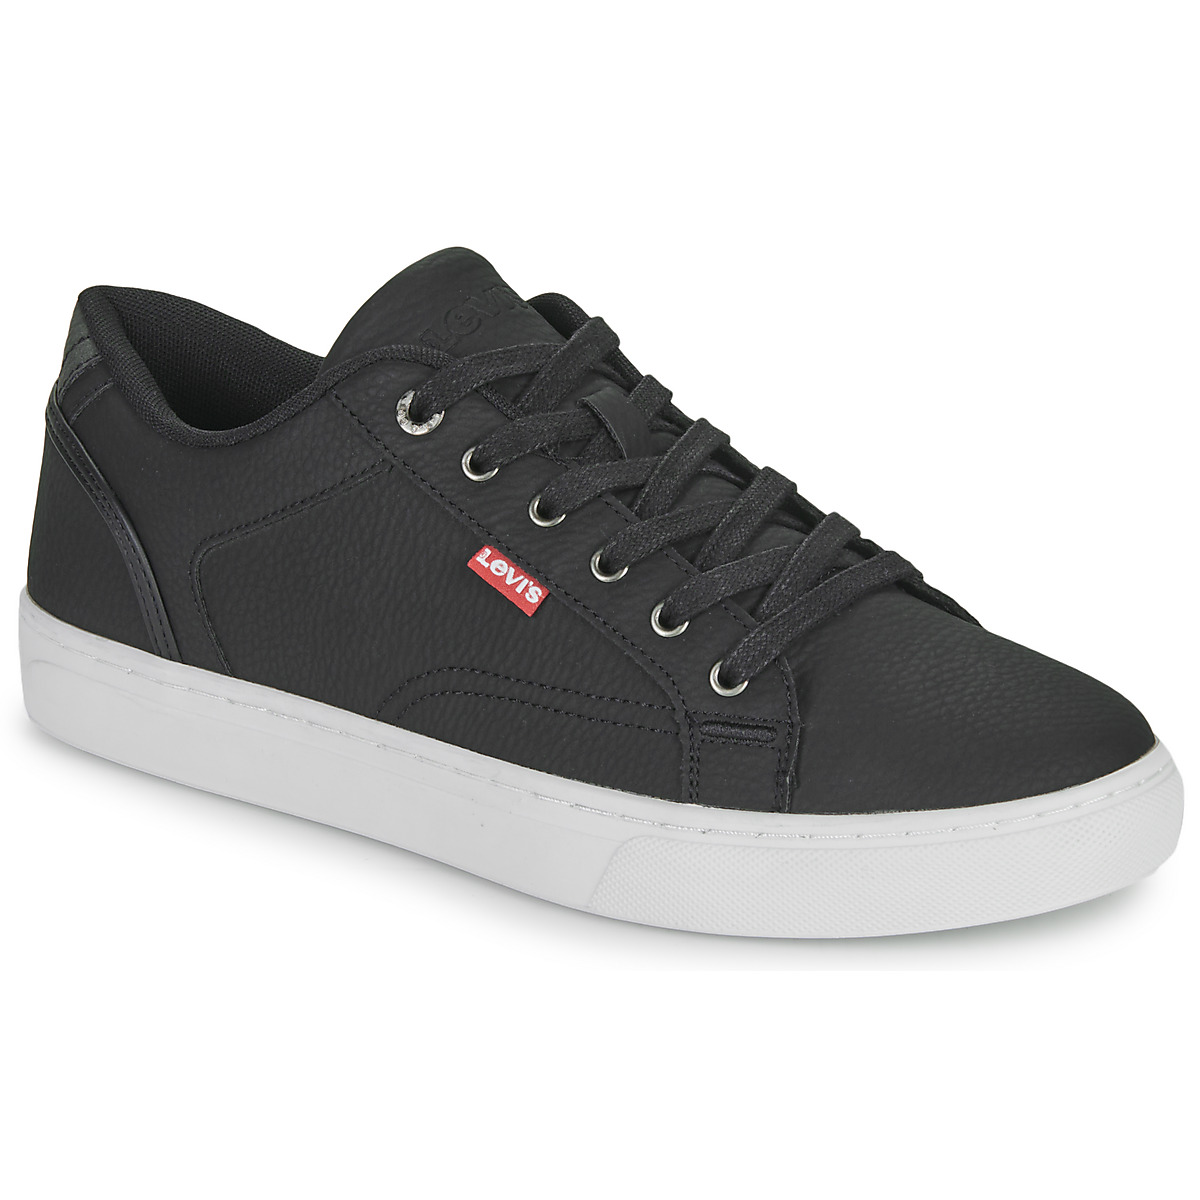 Levi's Courtright Black